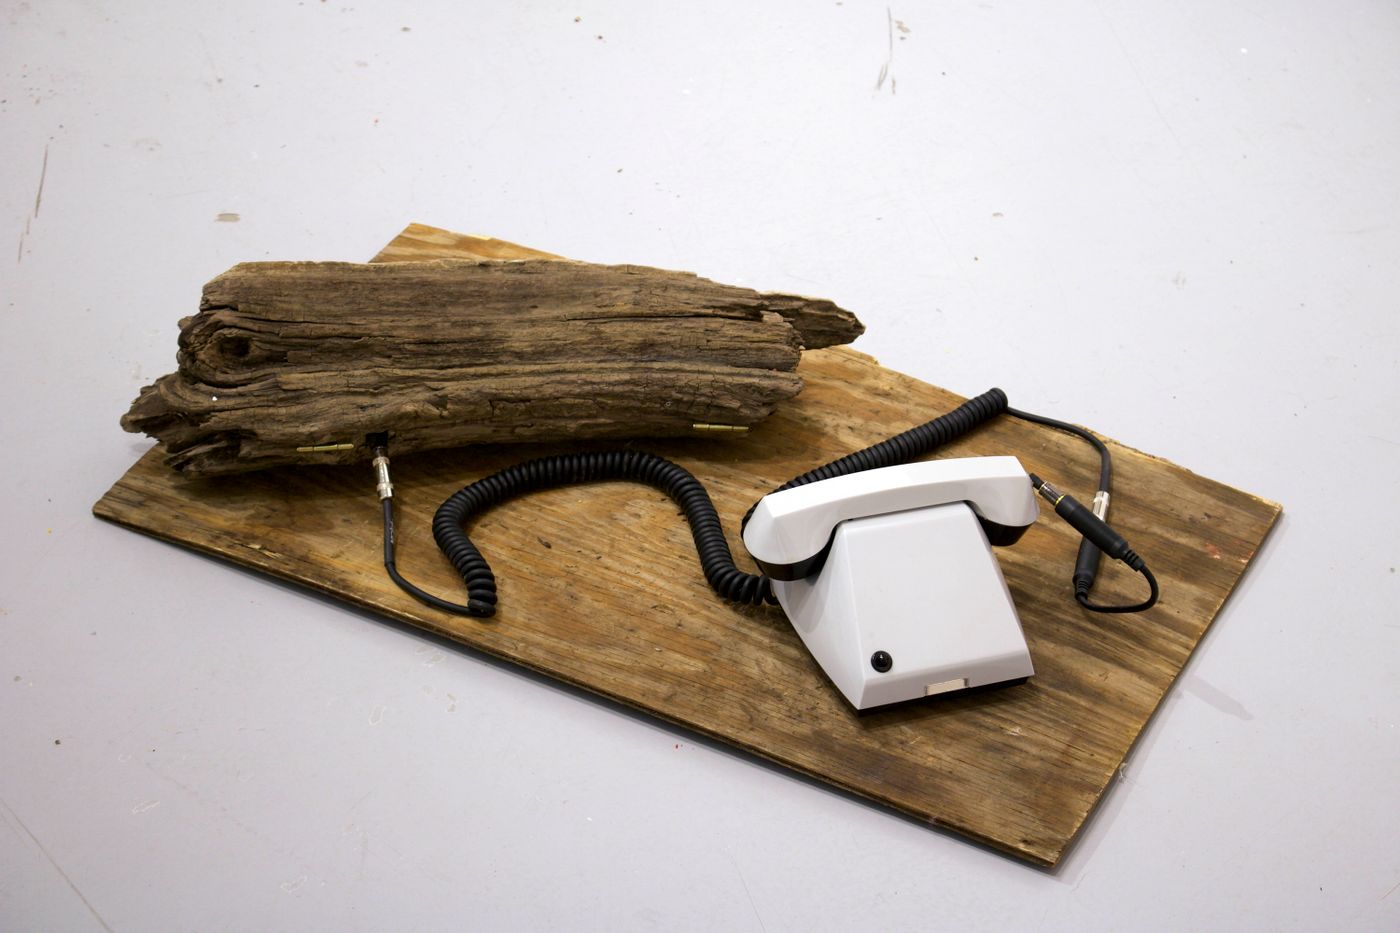 Driftwood Telephone (Device for Mediation), 2022. Soviet-era dial-less telephone, speaker, field recorder, driftwood, found plywood, 1/4 inch instrument cable; approx. 25 x 31 x 10 in.